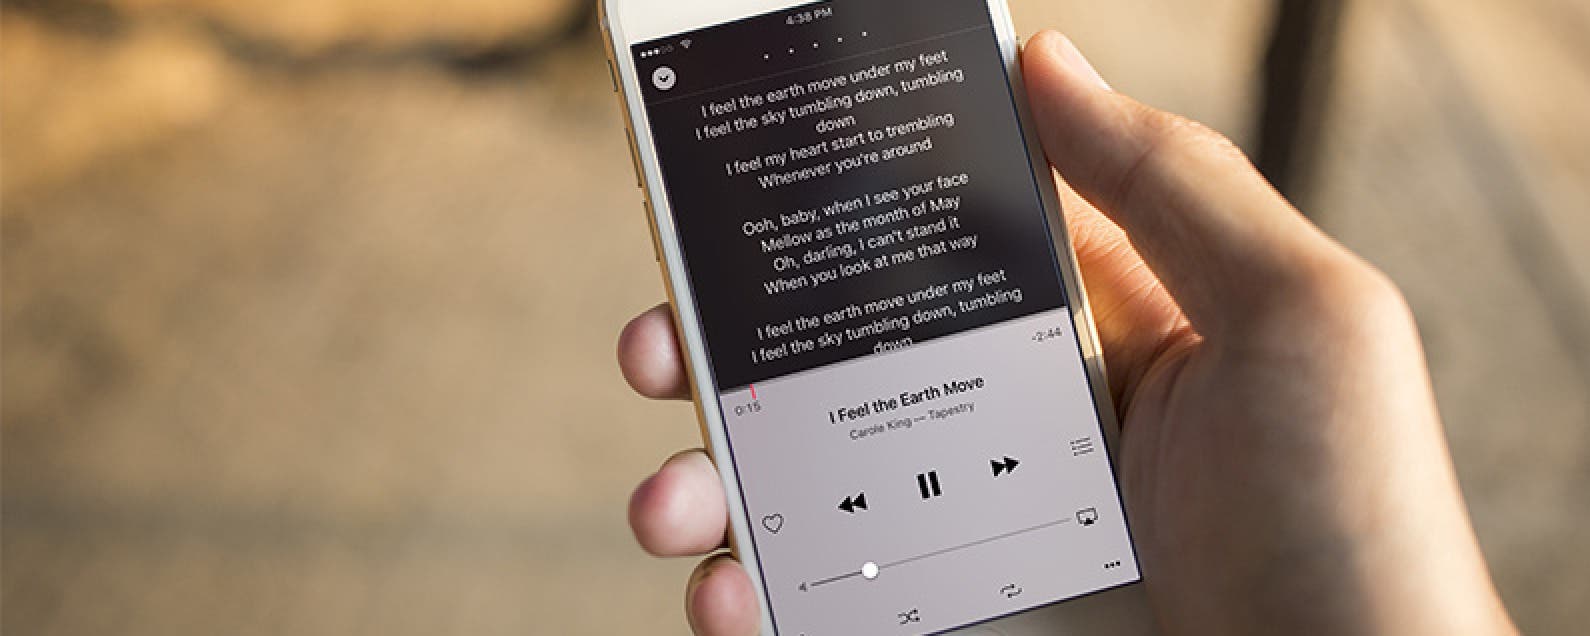 how to download songs on spotify iphone